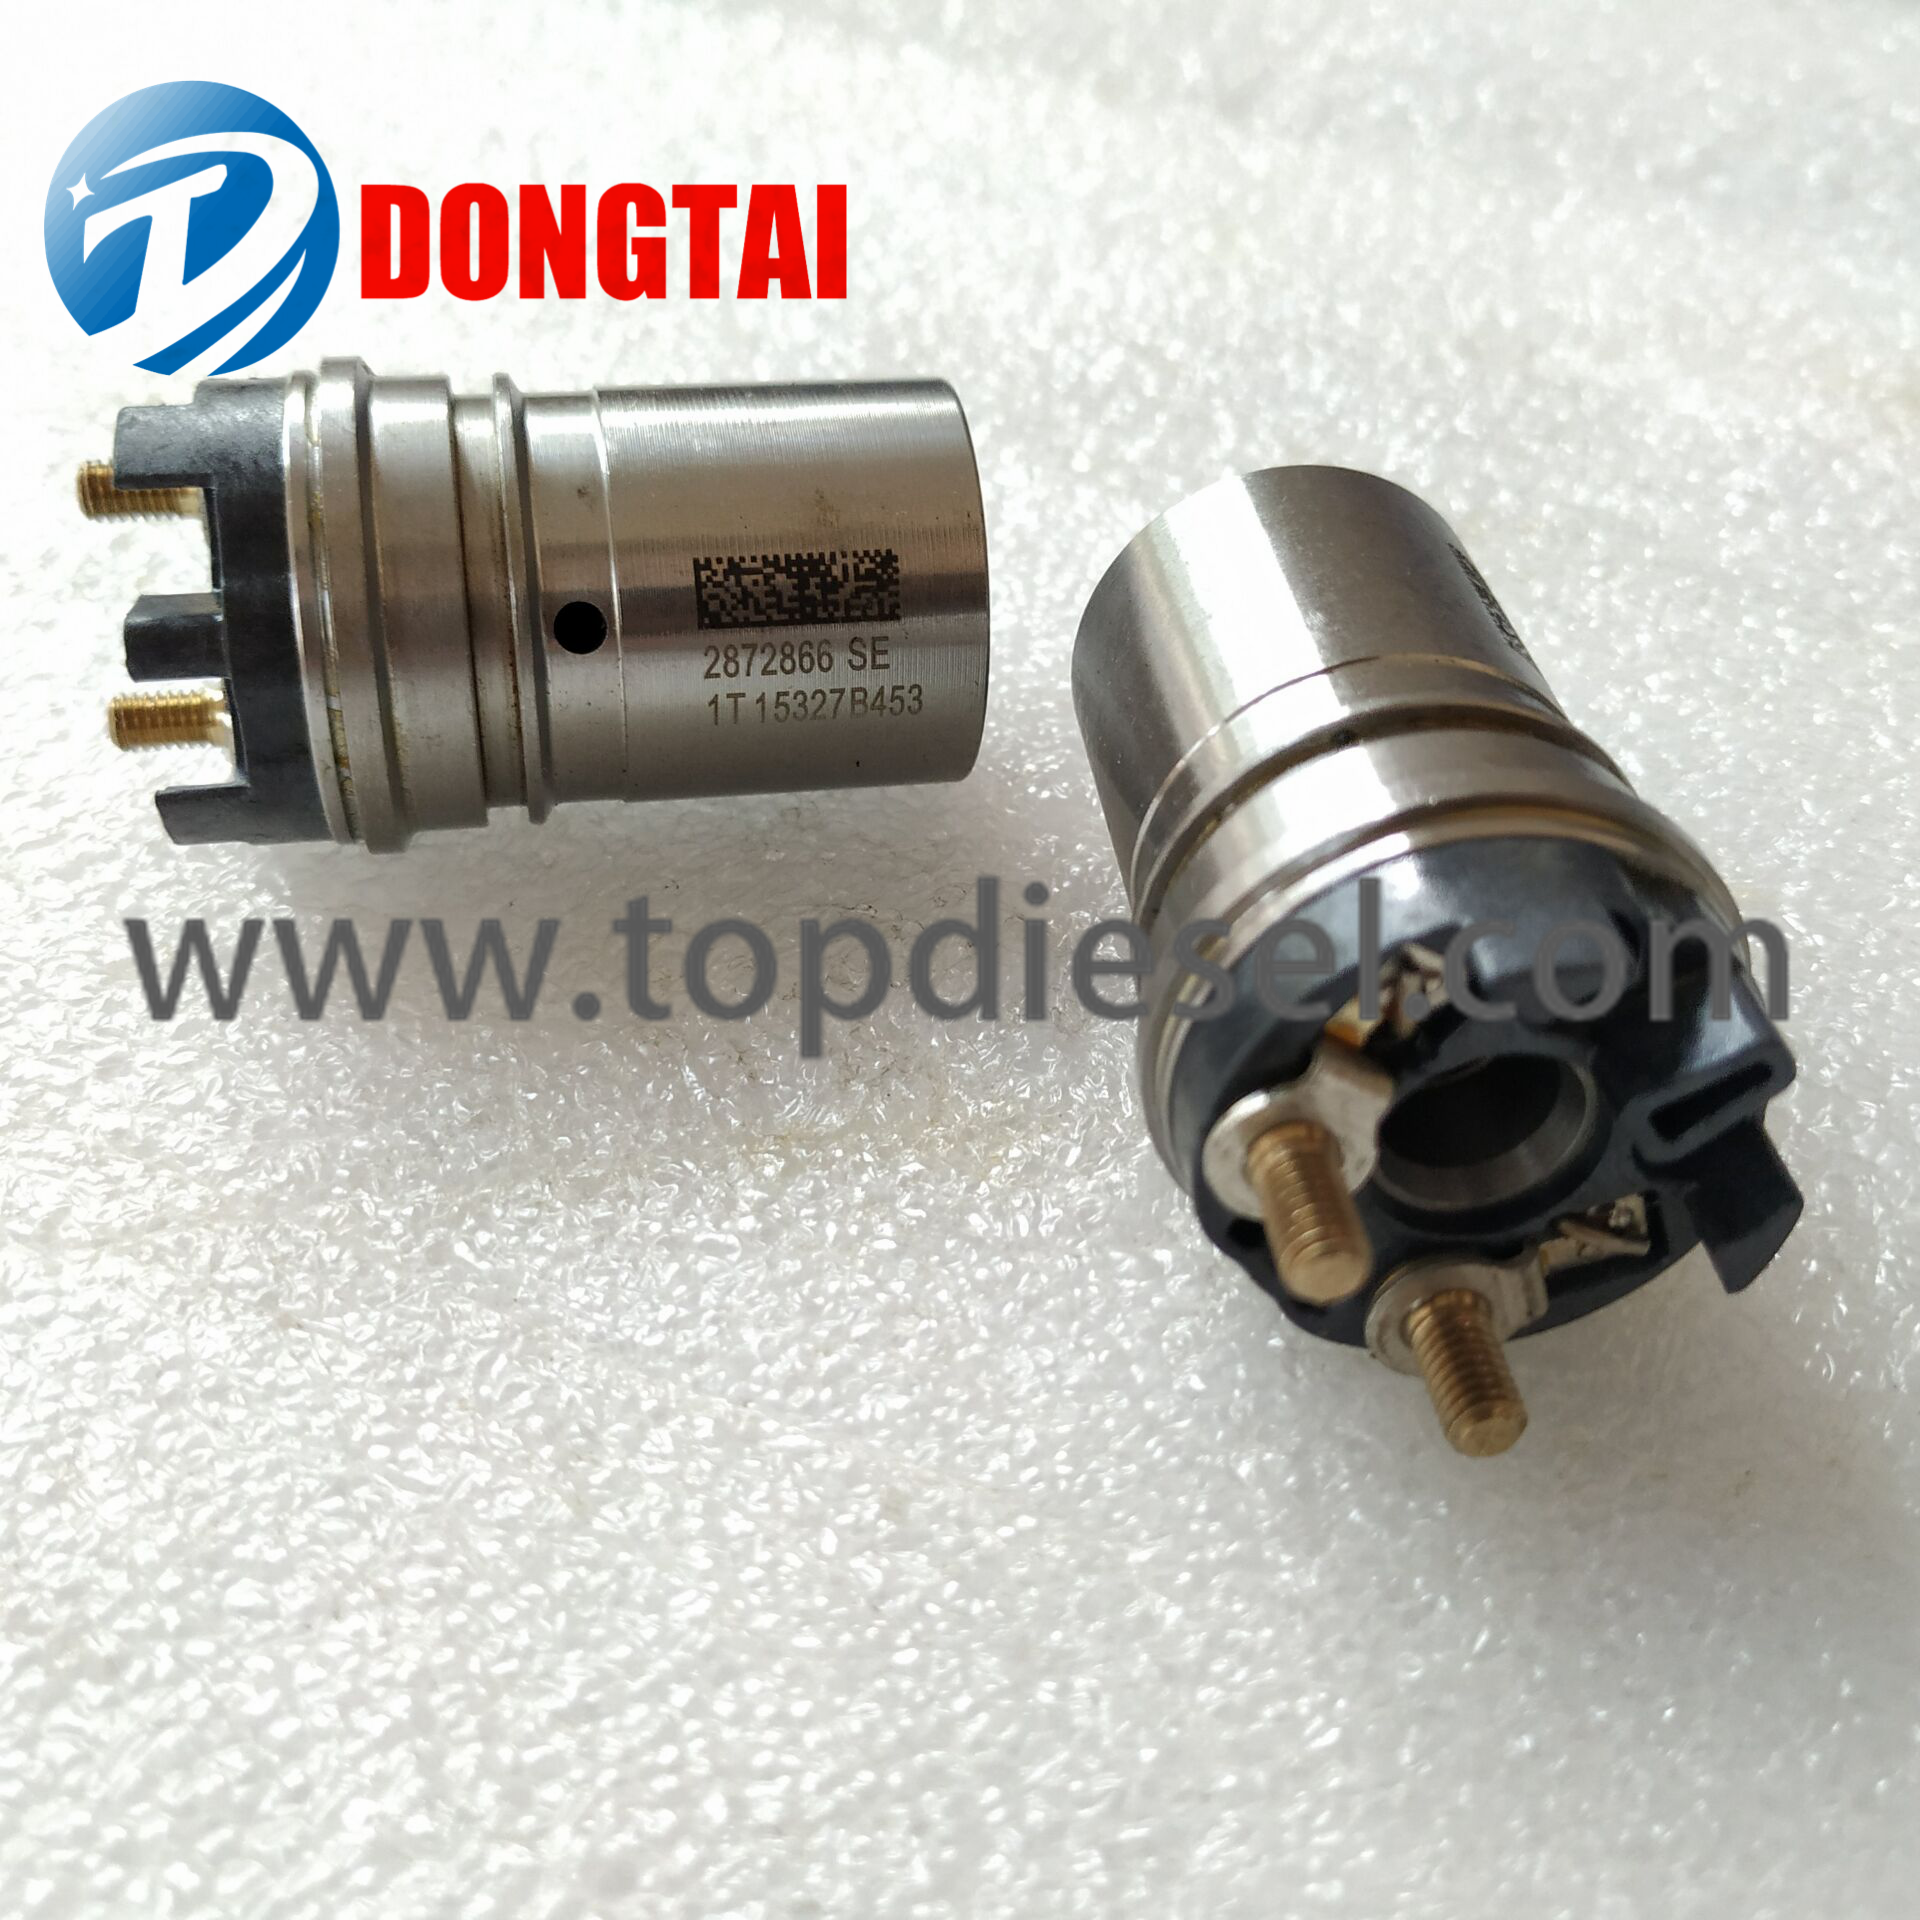 China Gold Supplier for Diesel Test Bench - No,523(2)2872866 Solenoid – Dongtai